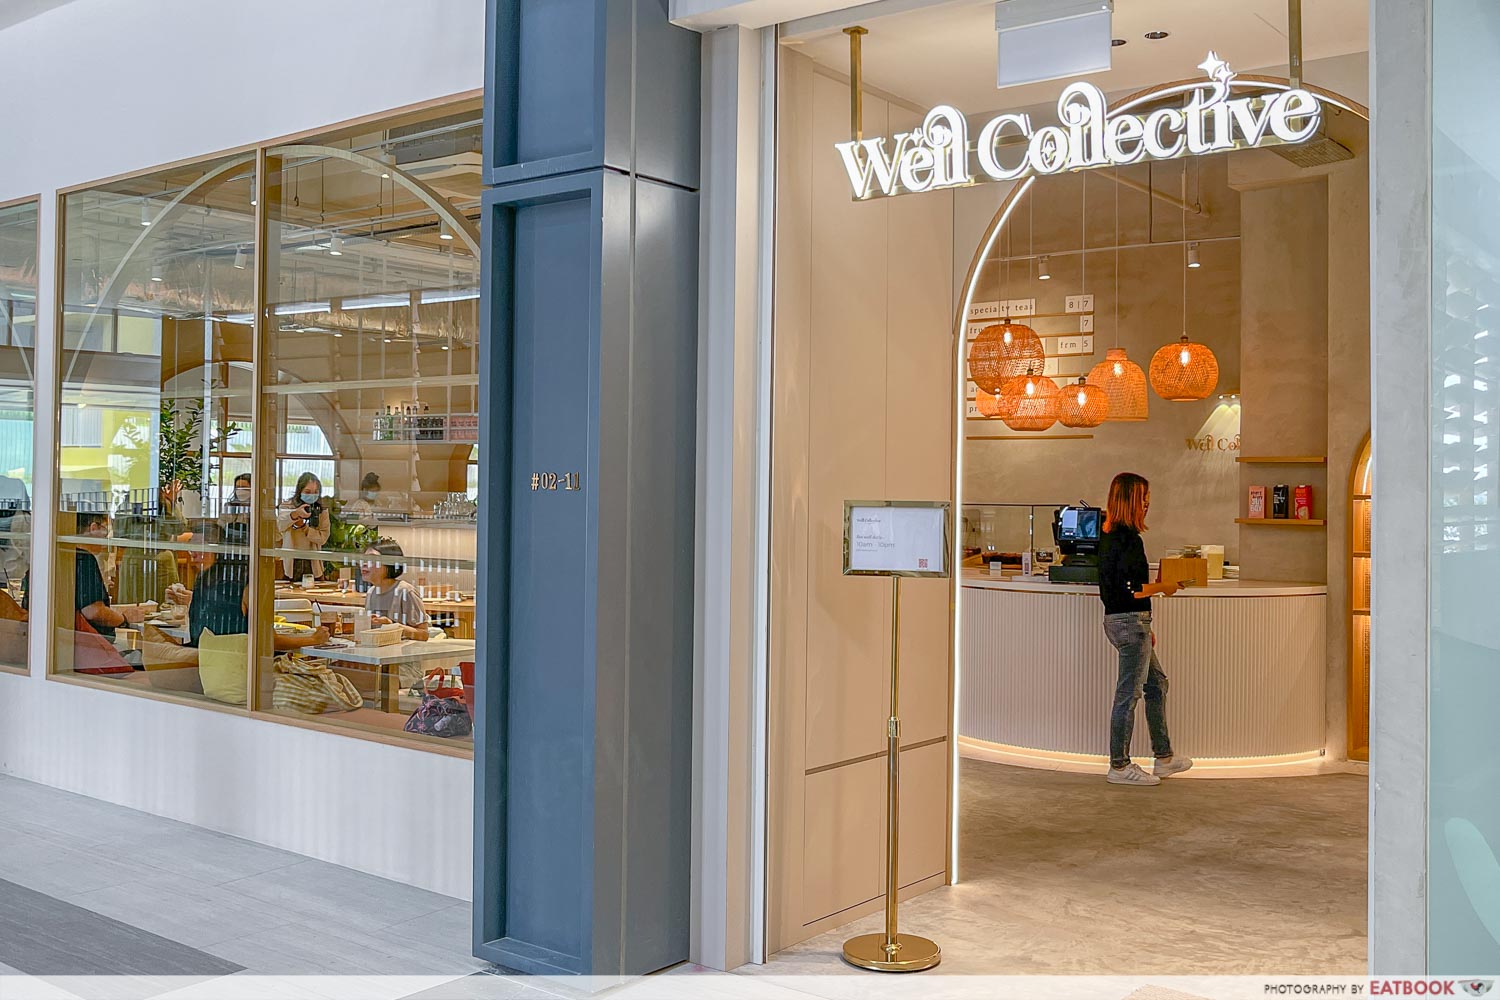 well collective cafe - store front